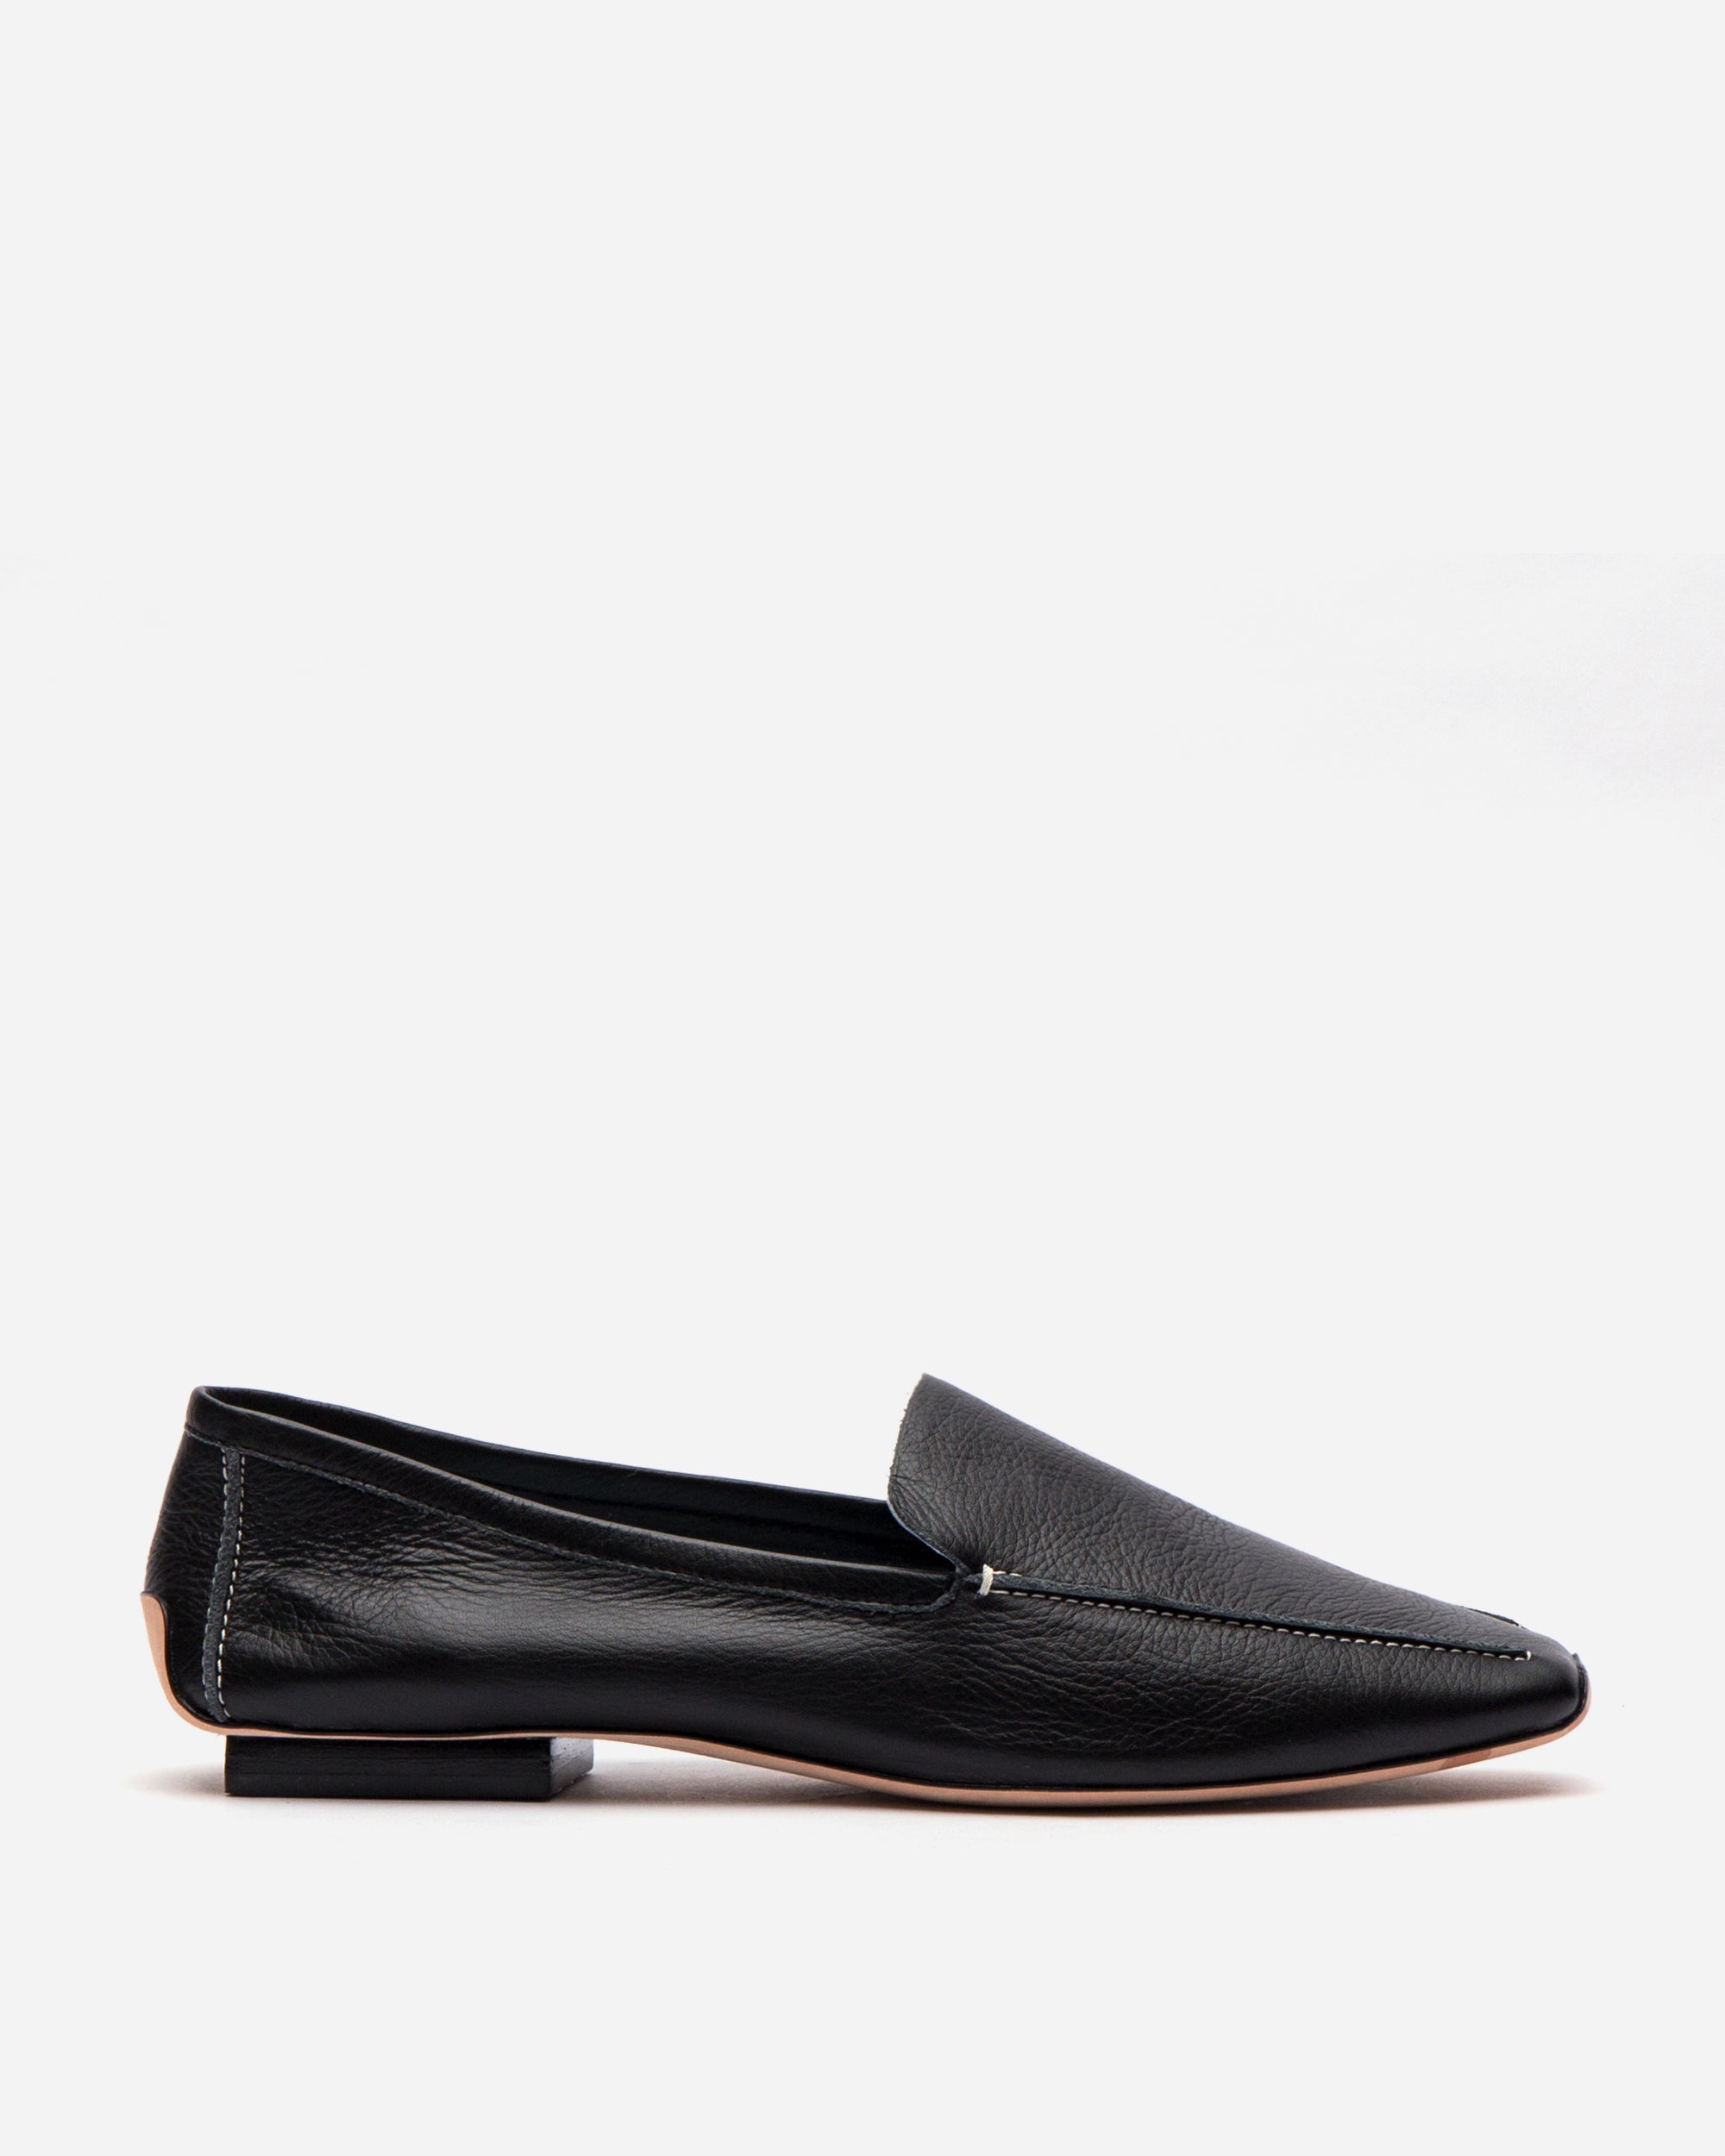 simple black loafers